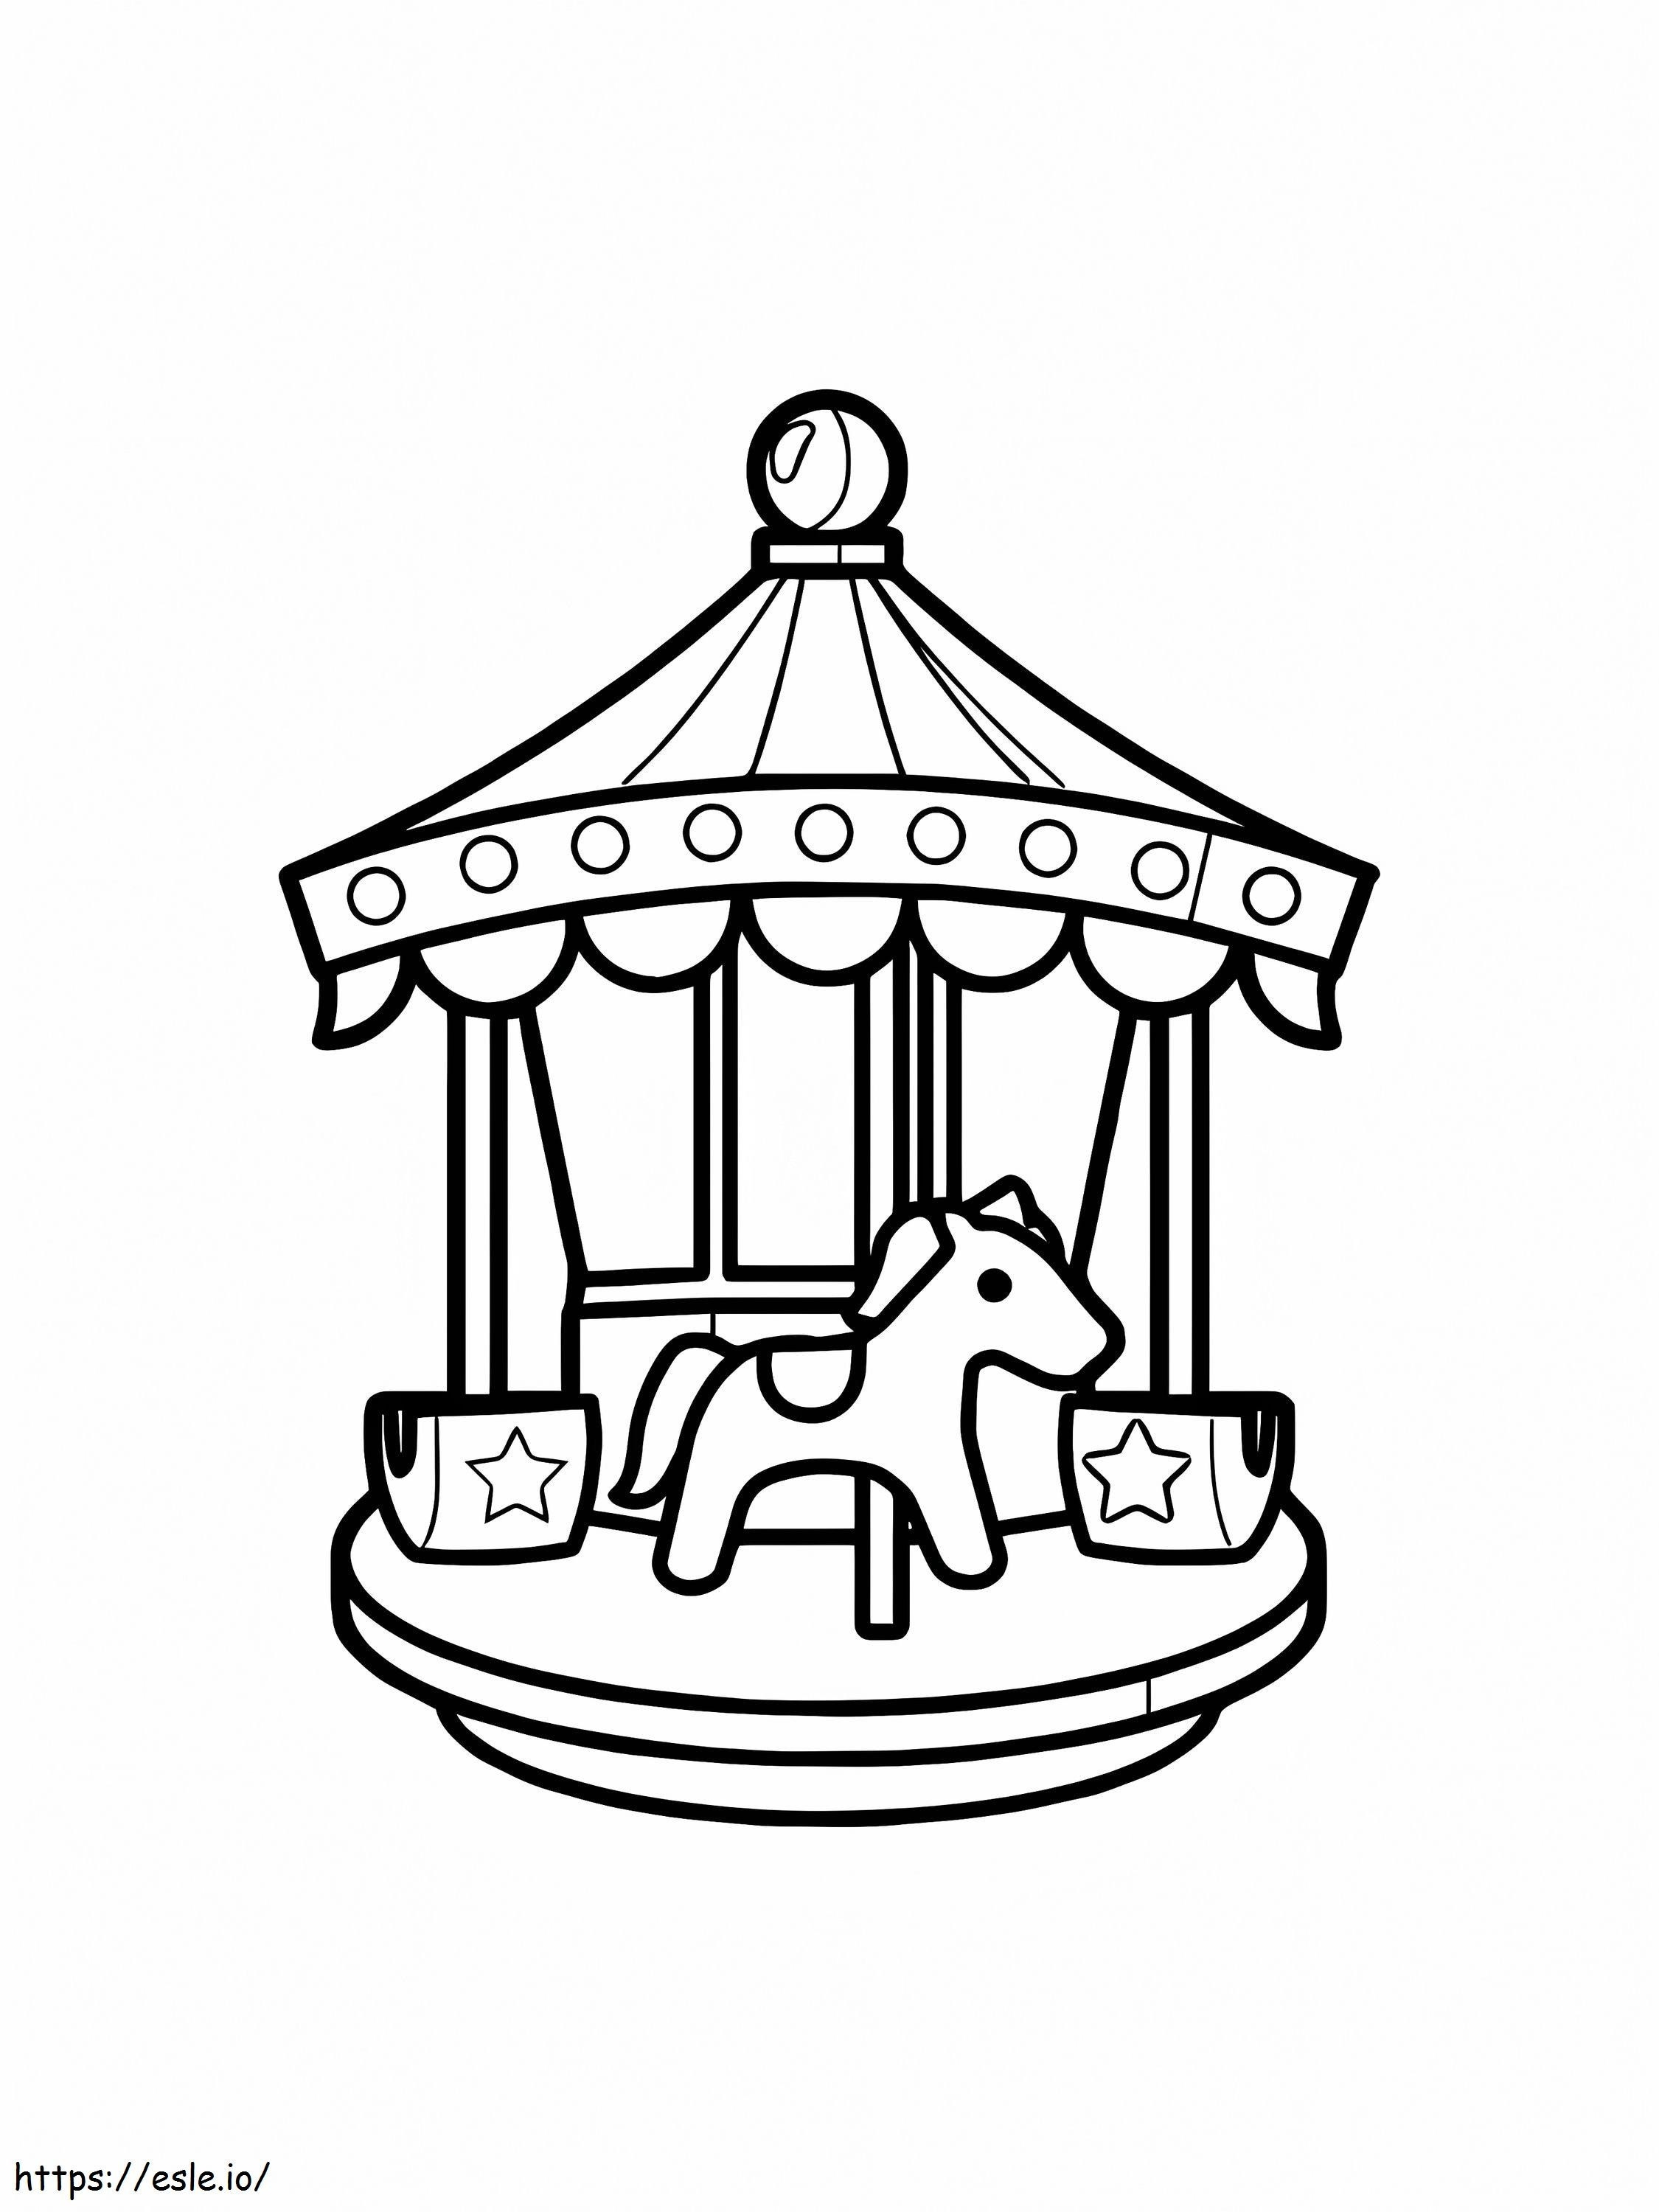 Simple Carousel coloring page